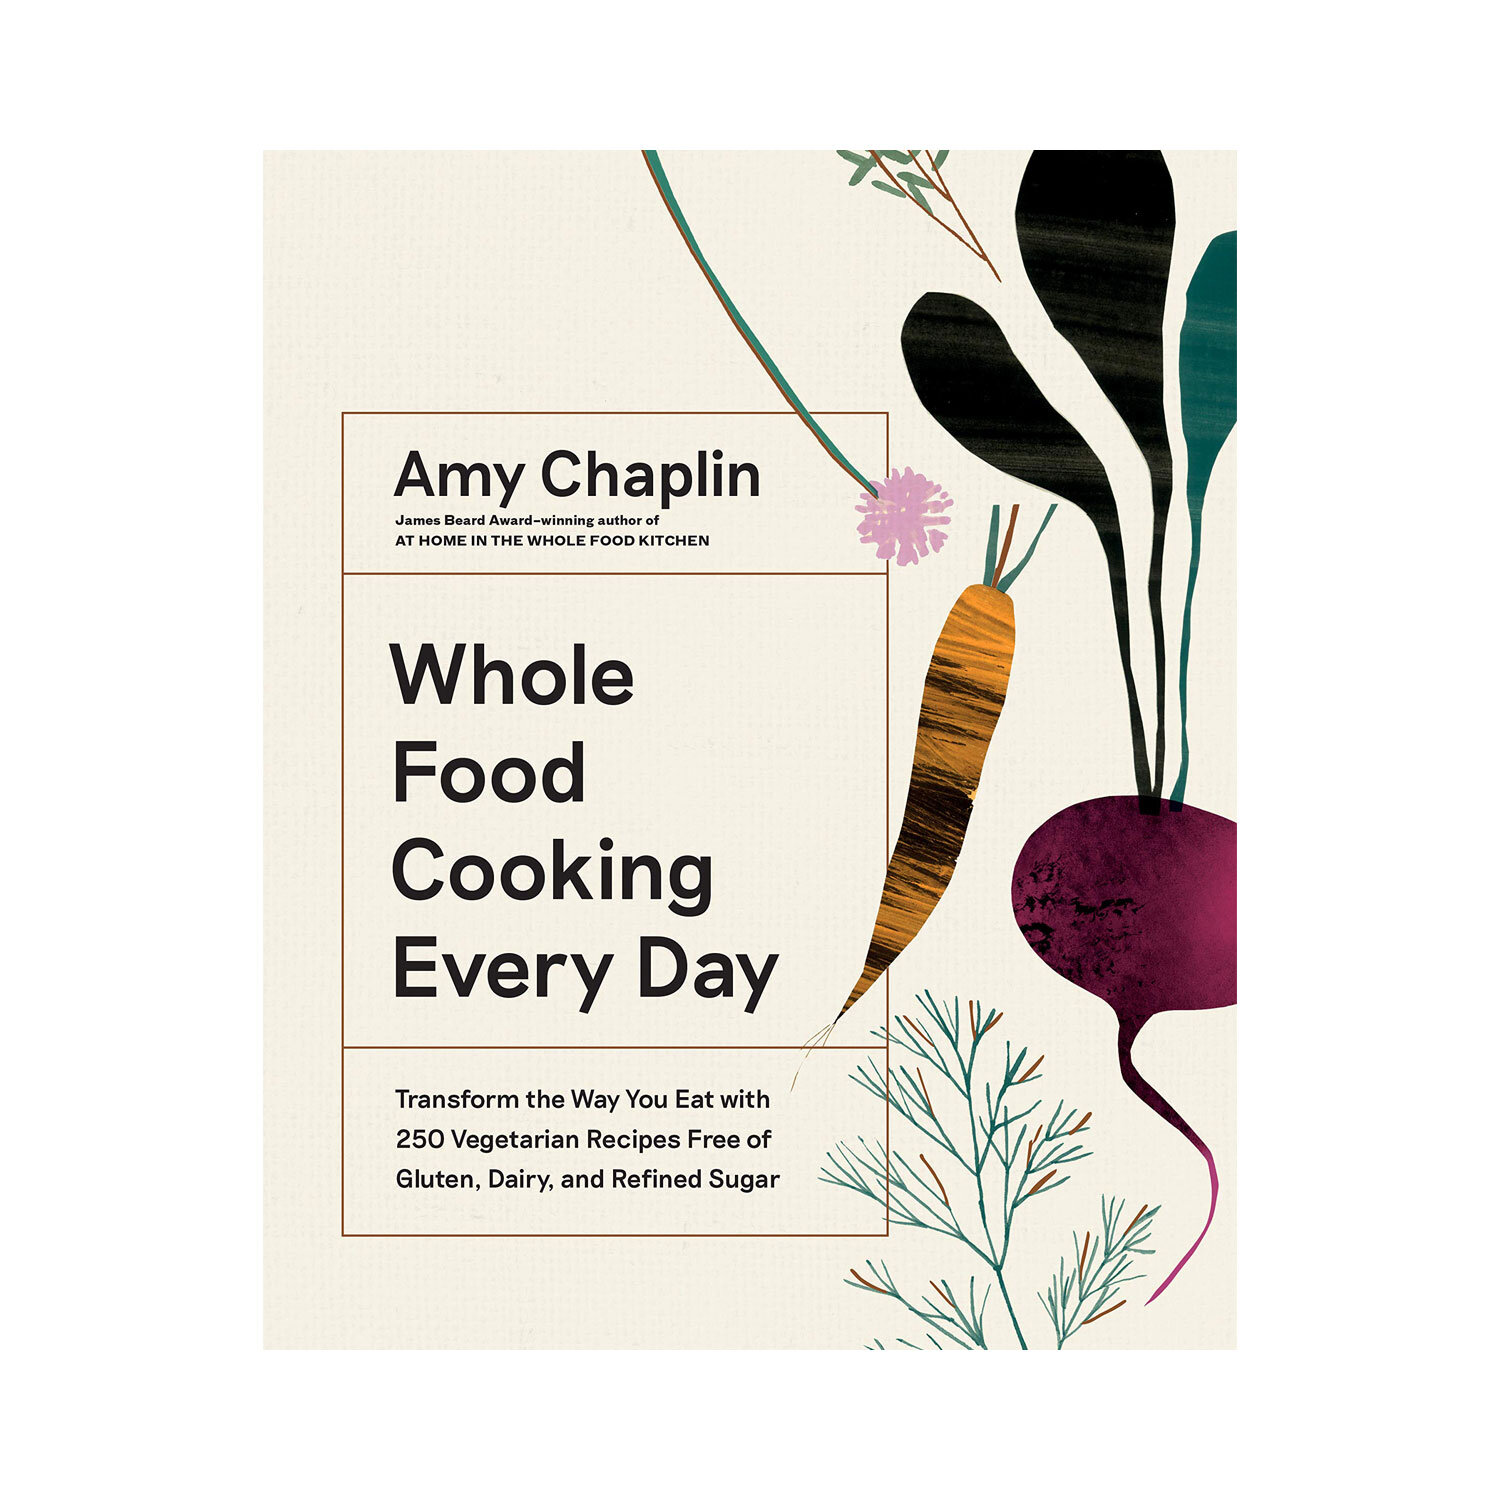 Whole Food Cooking Everyday by Amy Chaplin